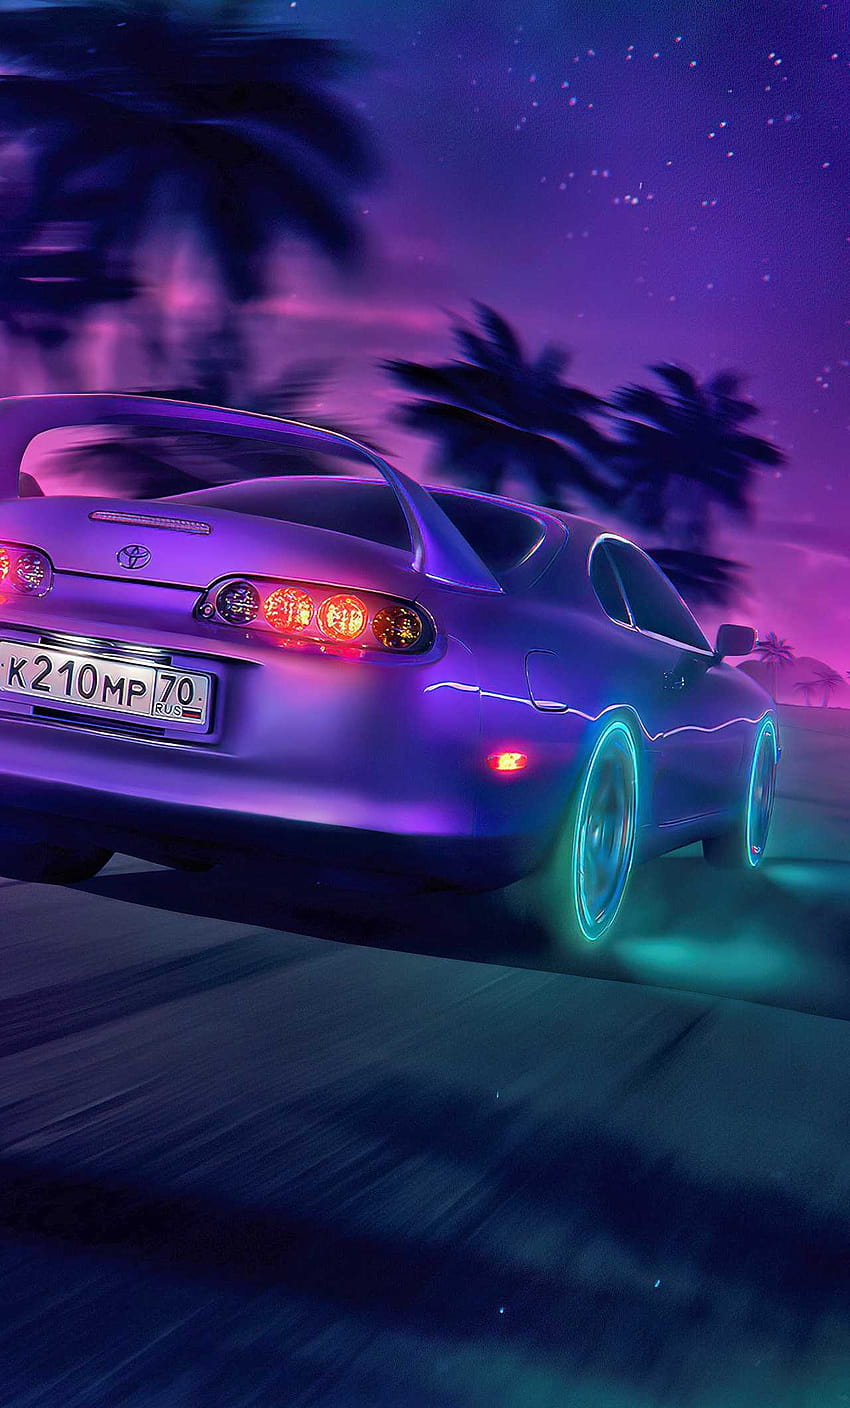 NGR Performance  Toyota Supra Thats going into the wallpaper folder  Follow ngrperformance for latest updates Tags toyota supra supramk4  drift car supranation a90 mk5 mk4 mk3 toyotasupra supraturbo jdm  musclecar muscle 